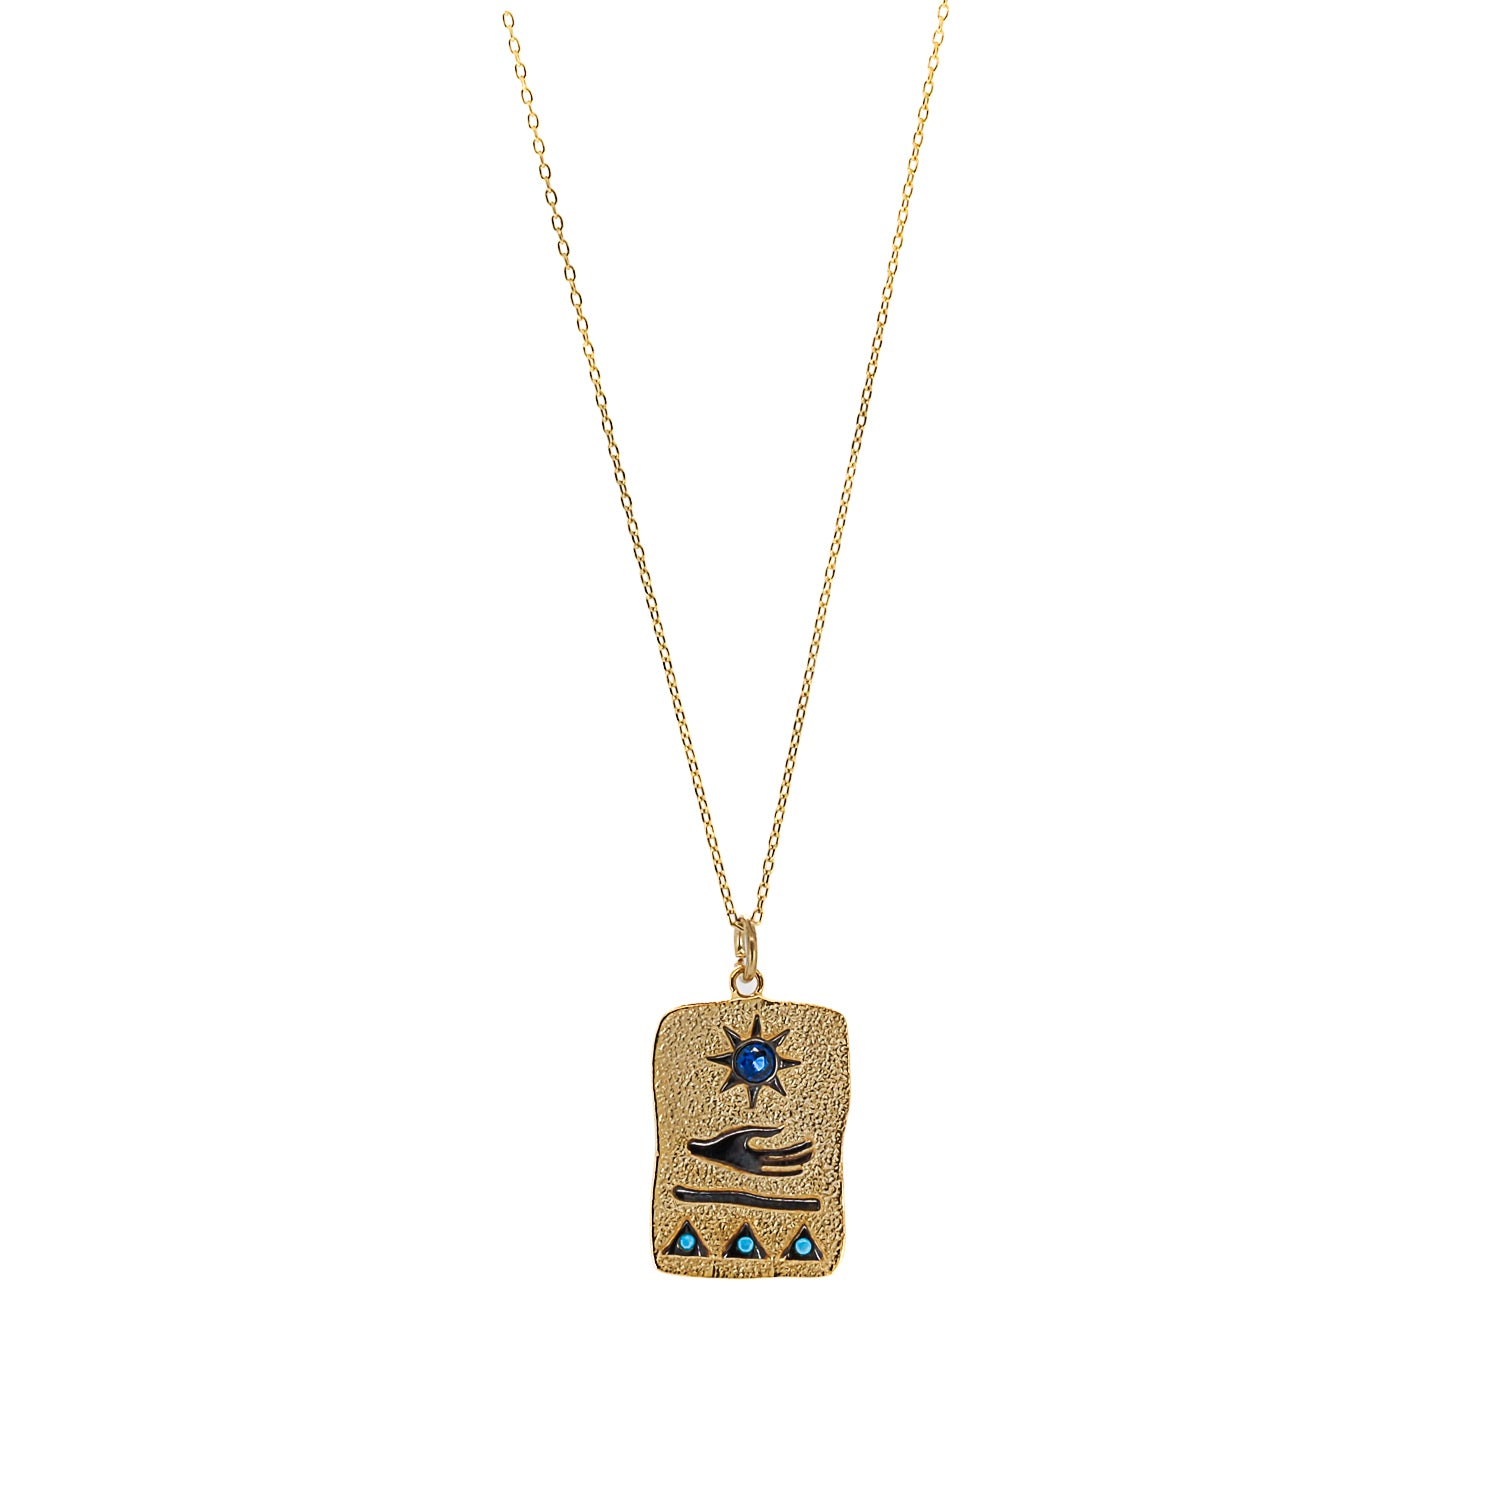 Sterling Silver Necklace Luxuriously Coated in 24K Gold - A Shimmering Delight.